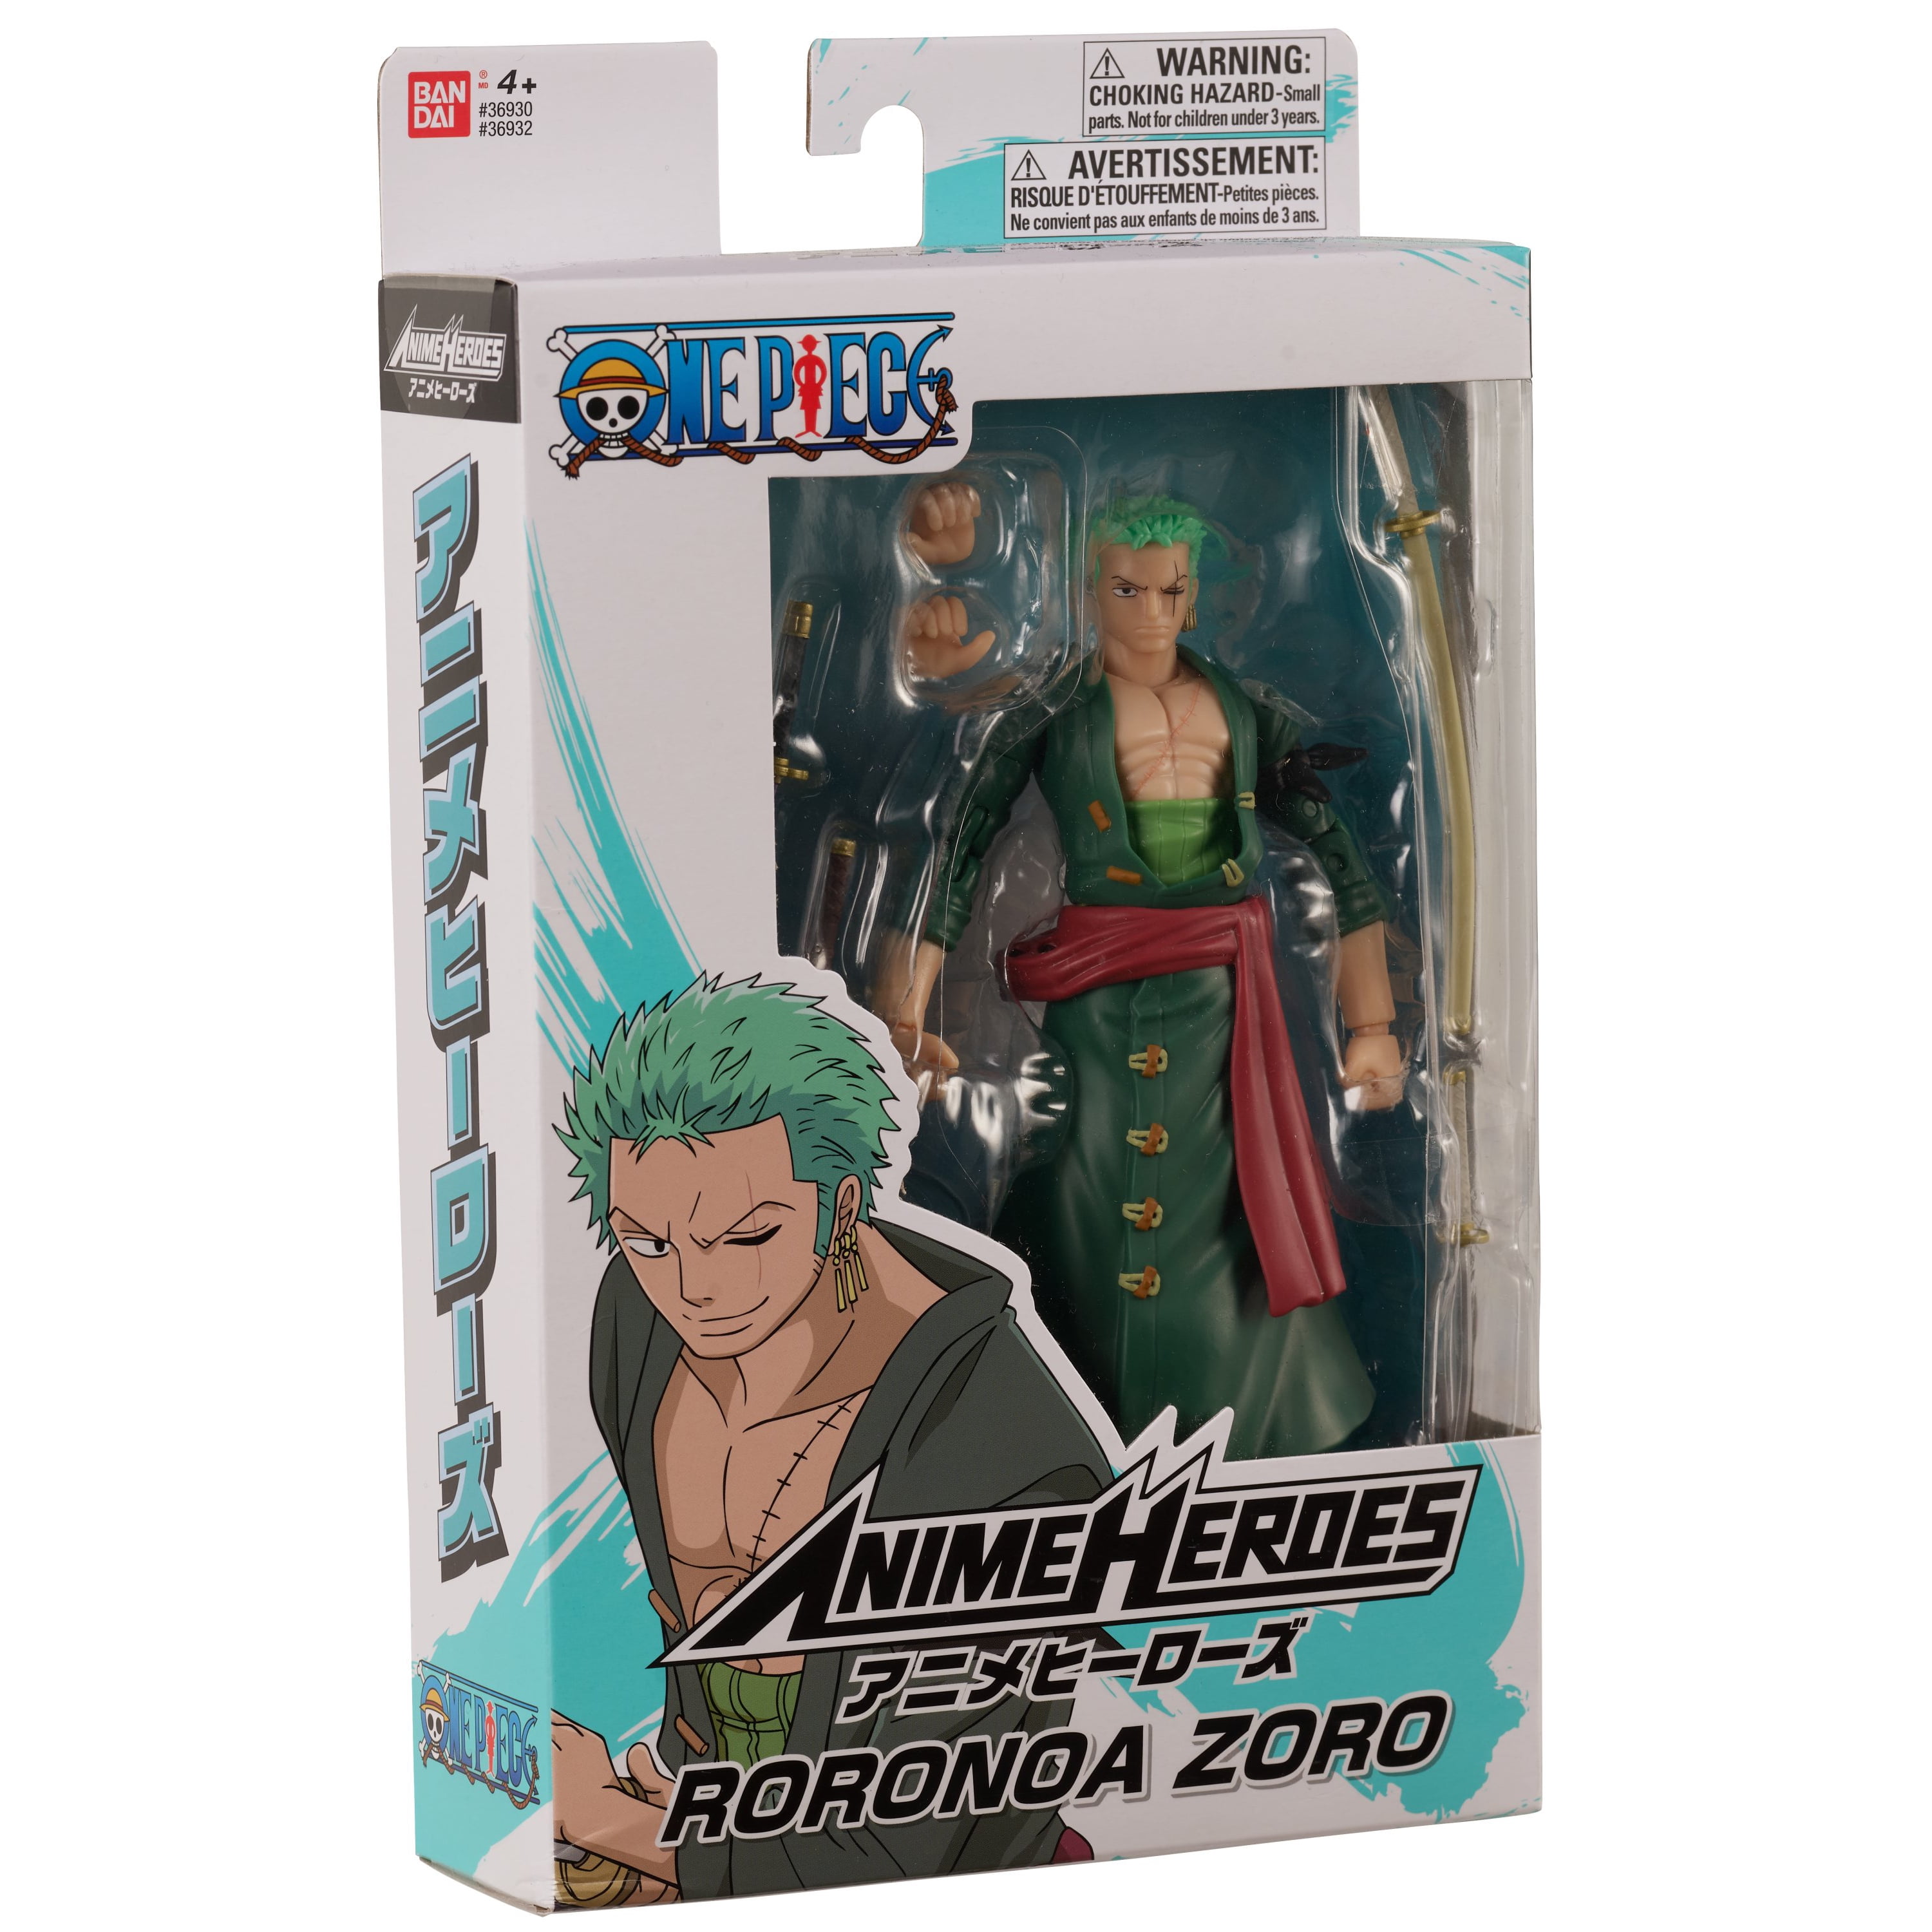 Anime Heroes One Piece Zoro Action Figure (36932) & Naruto Uchiha Sasuke  Action Figure - One Piece Zoro Action Figure (36932) & Naruto Uchiha Sasuke  Action Figure . Buy Action figure toys